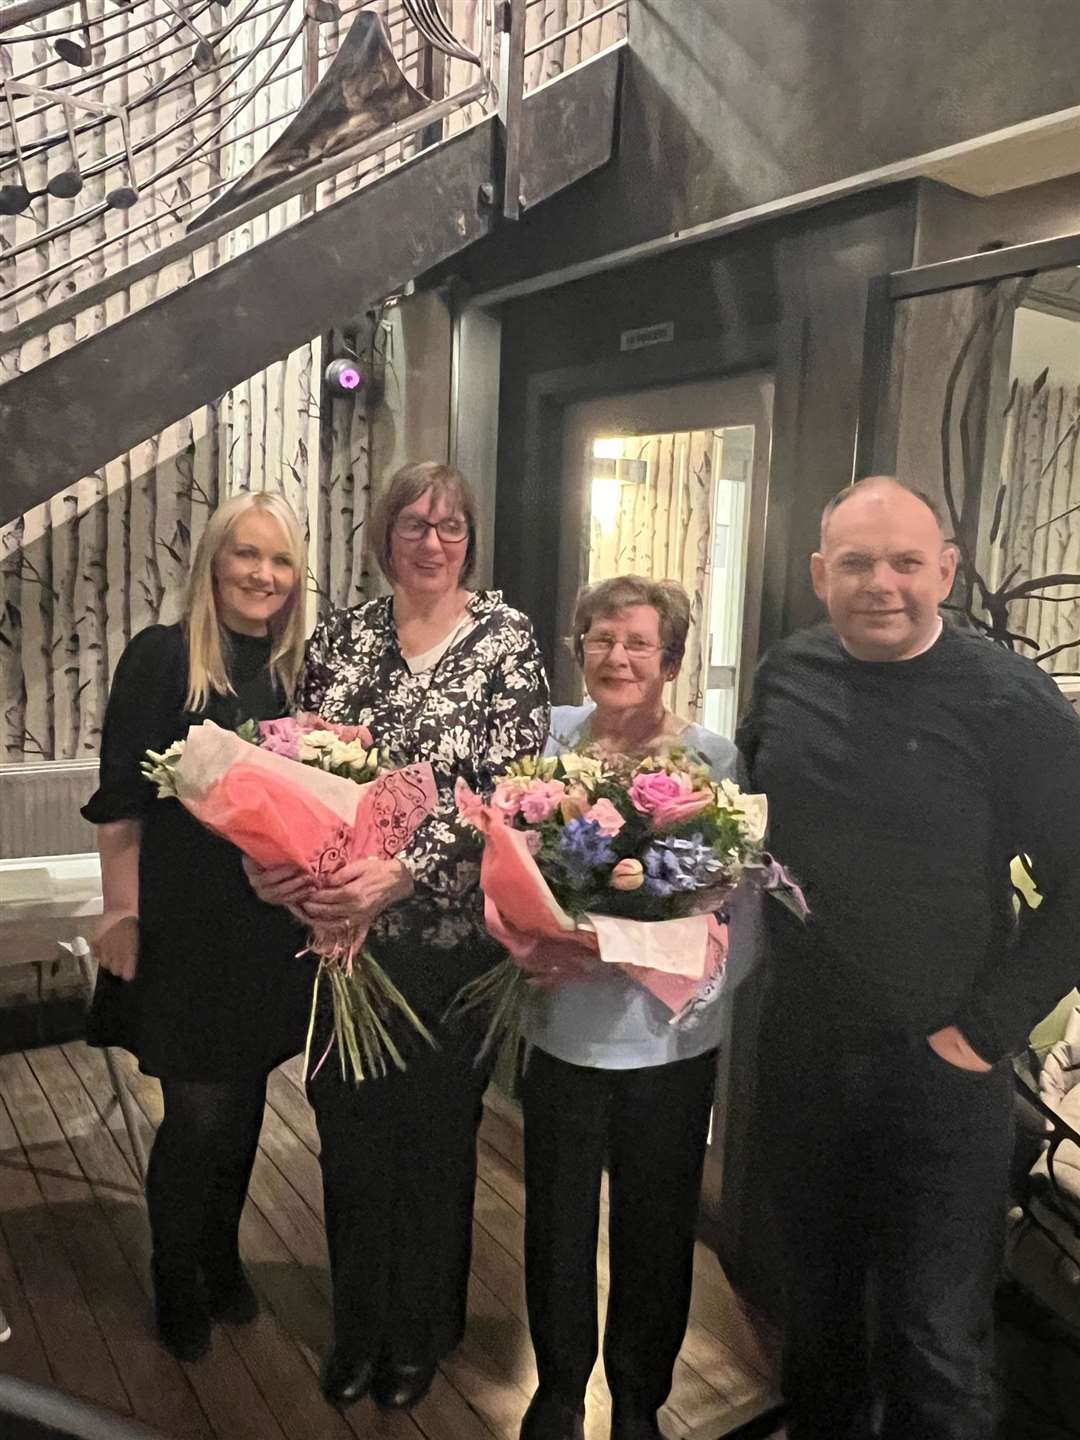 Gary and his wife Tracy (left) after presenting the bouquets to Gary's mother Joyce and staff member Maureen Webster.